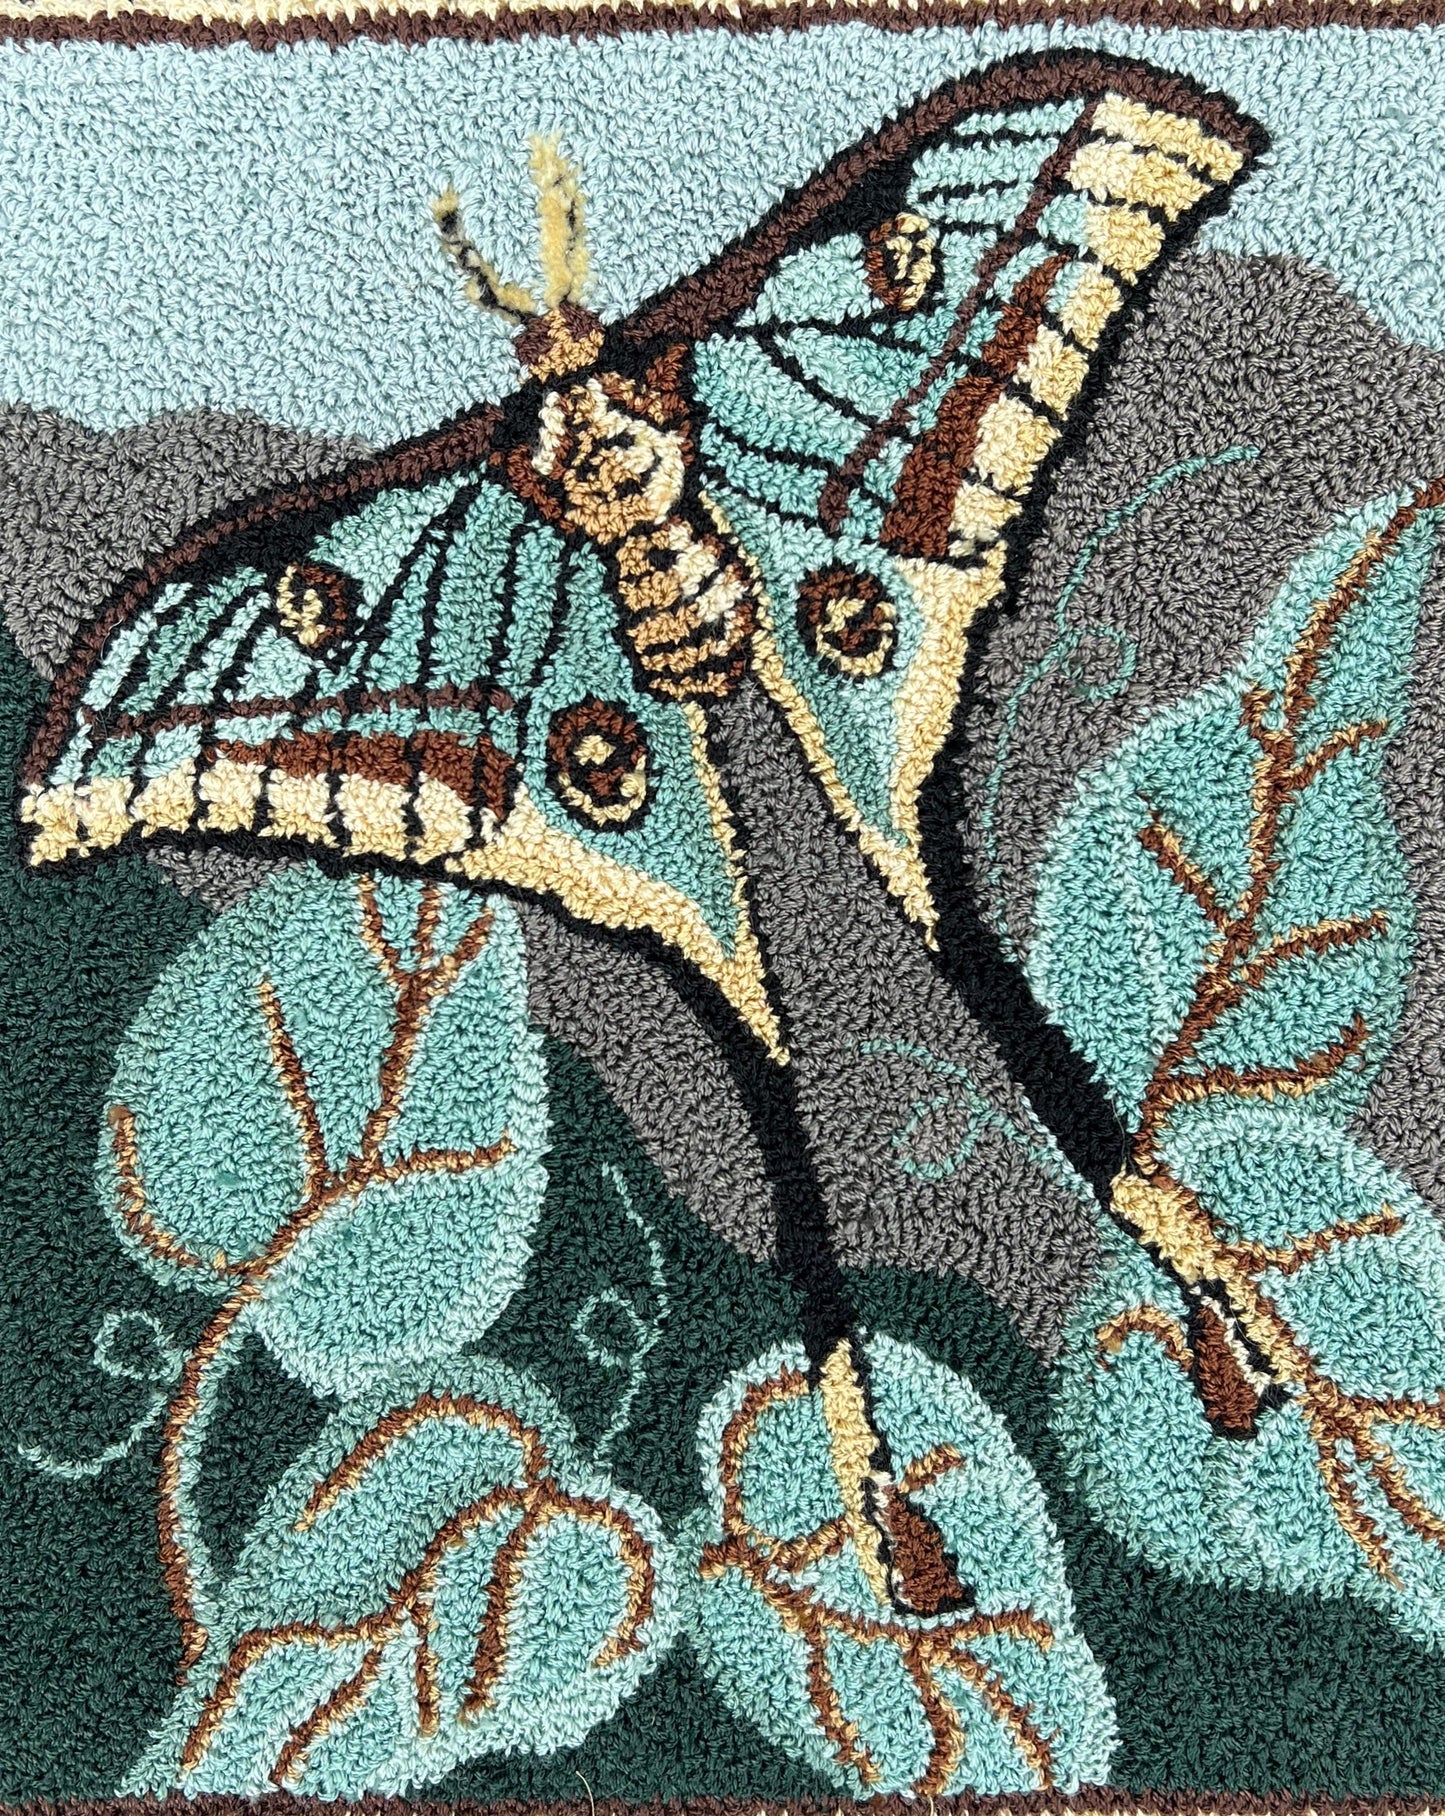 The Spanish Moon Moth Needle Punch Pattern by Orphaned Wool, Copyright © 2023 Kelly Kanyok. Create the nature-inspired design of a Spanish Moon Moth in flight. Available are a Paper Pattern or Printed on Cloth ready to go on your frame or hoop.